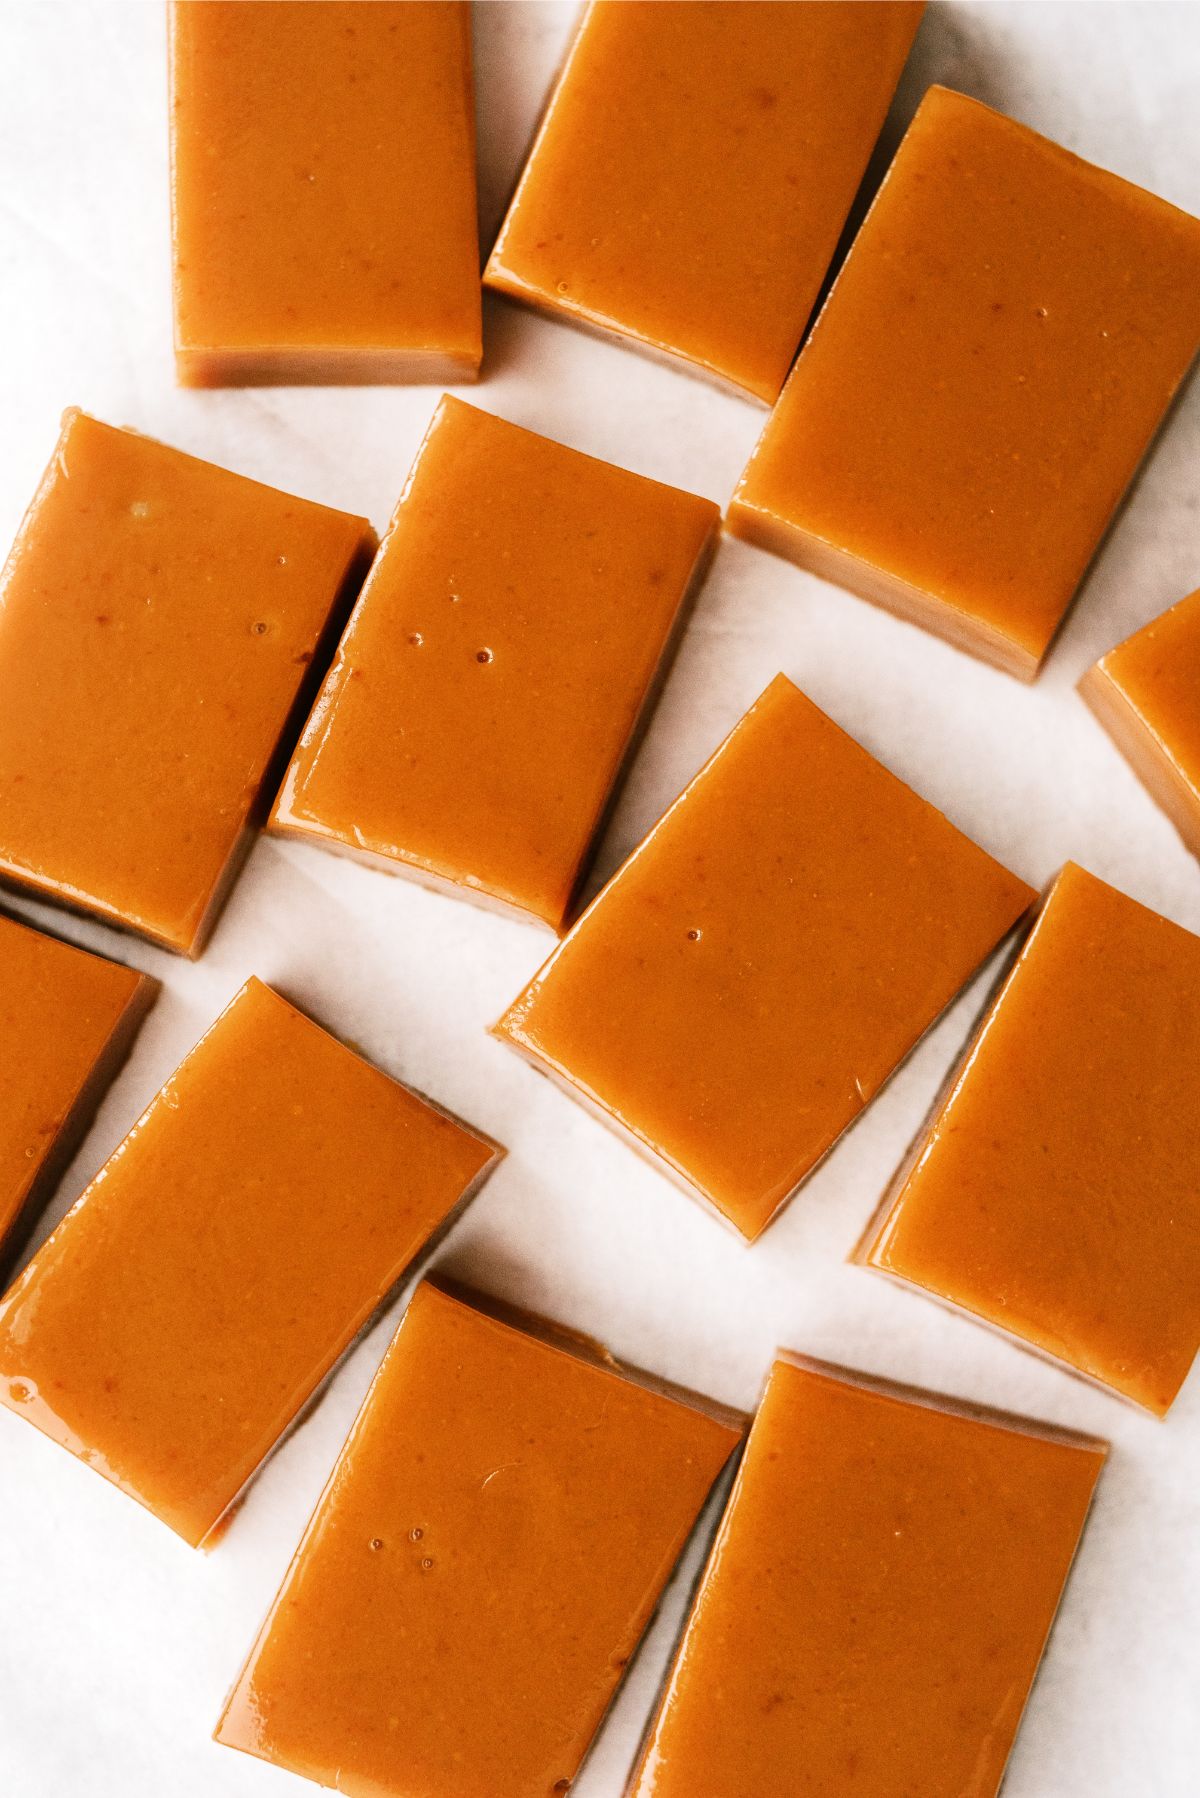 Homemade Caramels cut into rectangles